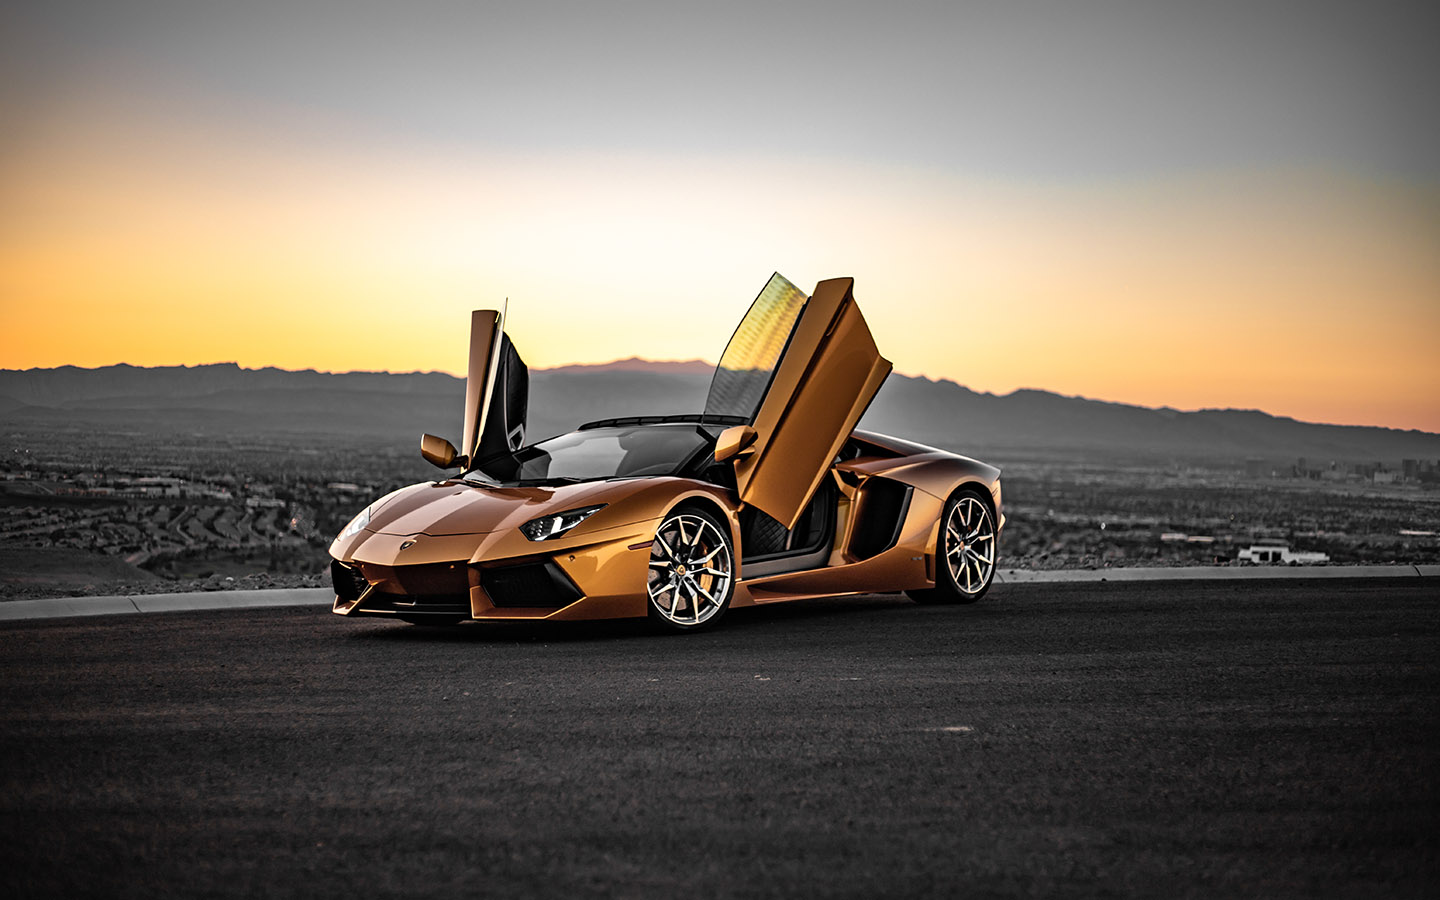 Lamborghini: 100 Years of Innovation in Half the Time is another one of the famous car books for car enthusiasts